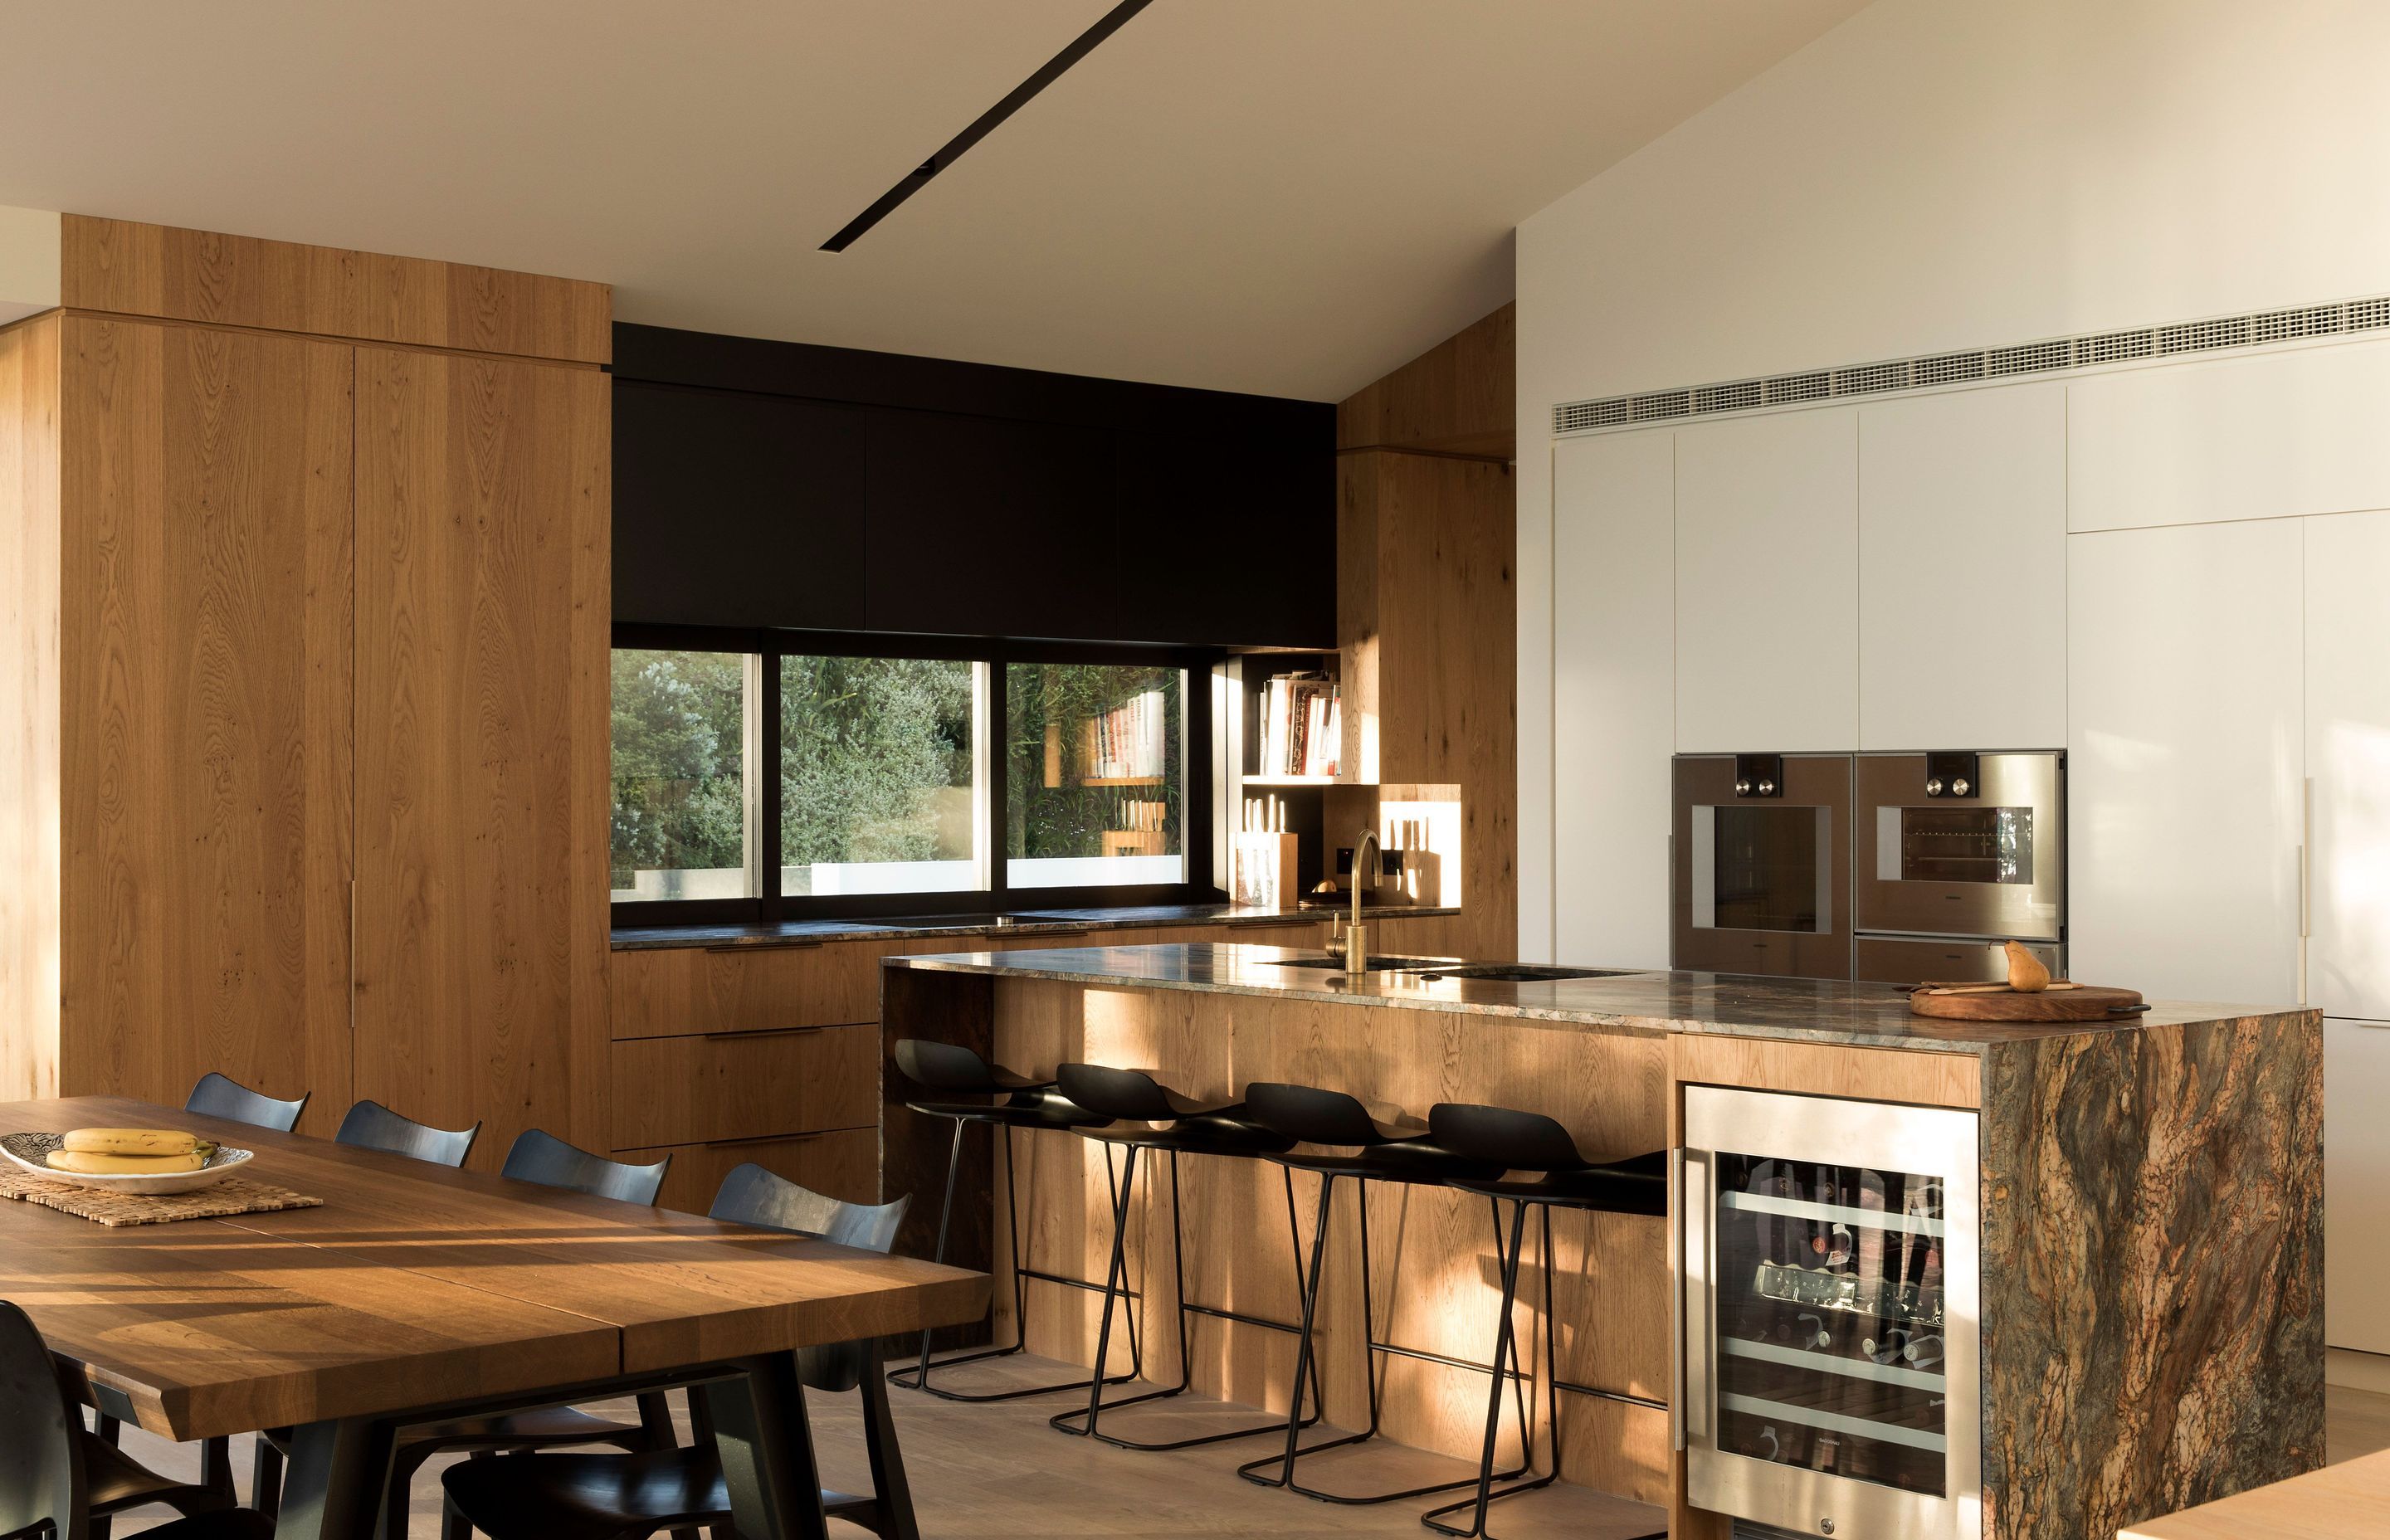 A natural material palette of timber, stone and brass, with black accents in the joinery and furnishings, are utilised throughout the home and are especially evident in the kitchen.